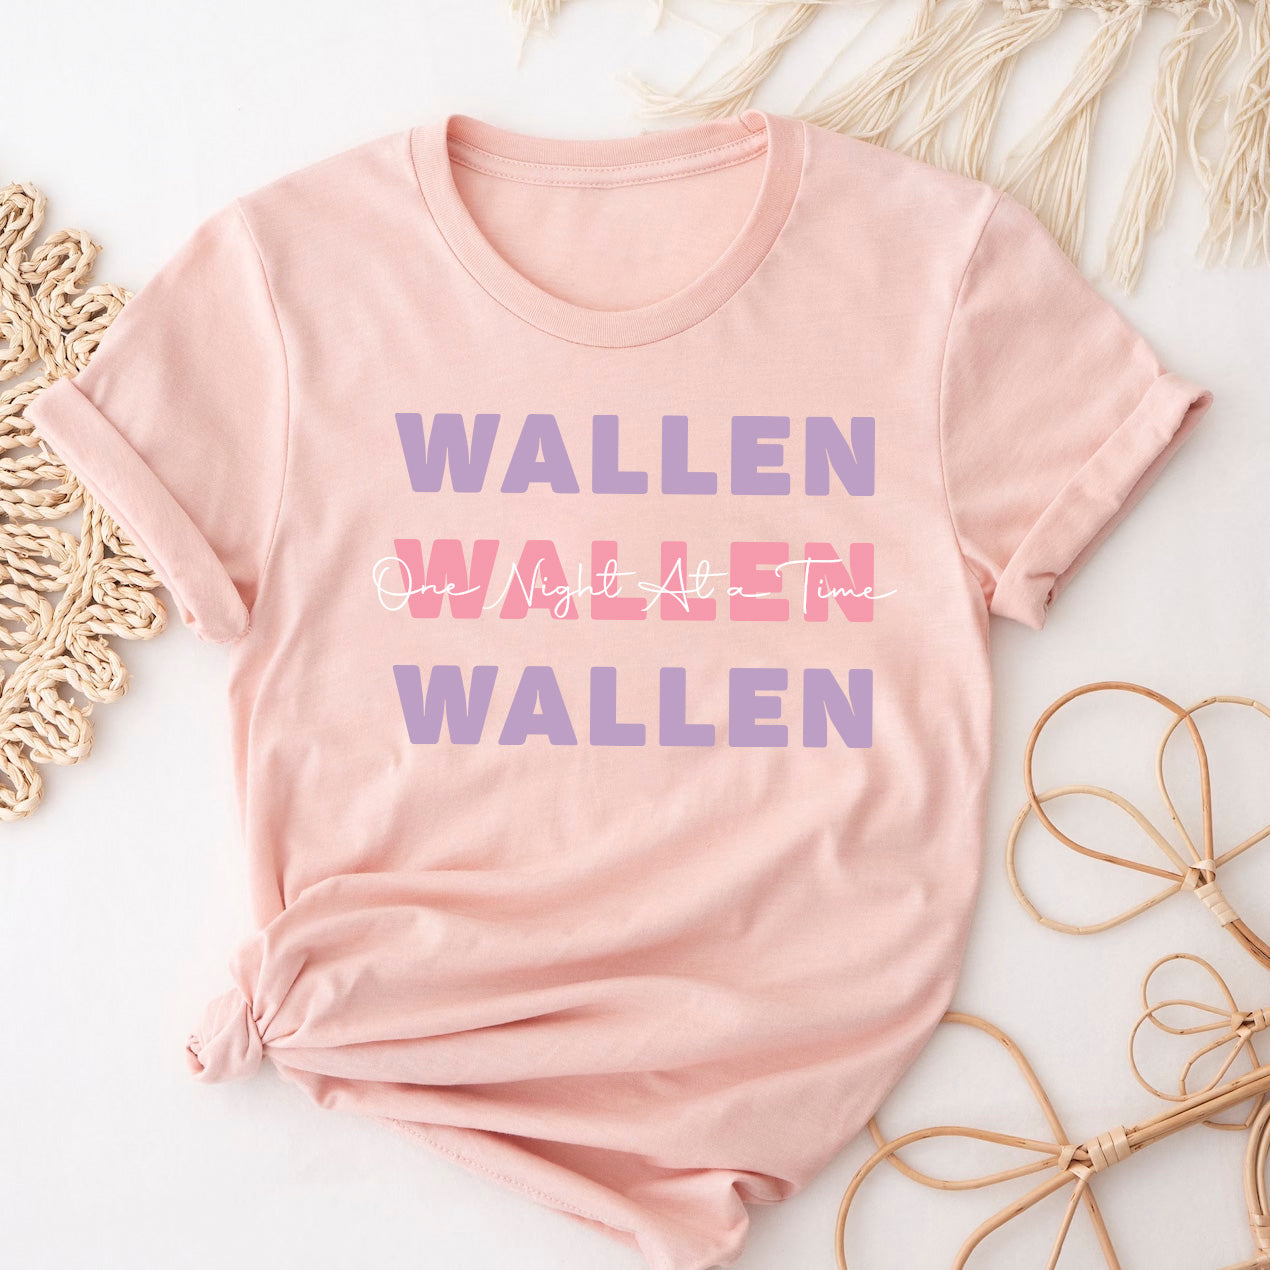 Classic Country Appeal: Kids Girls Western Shirt with a Touch of Wallen